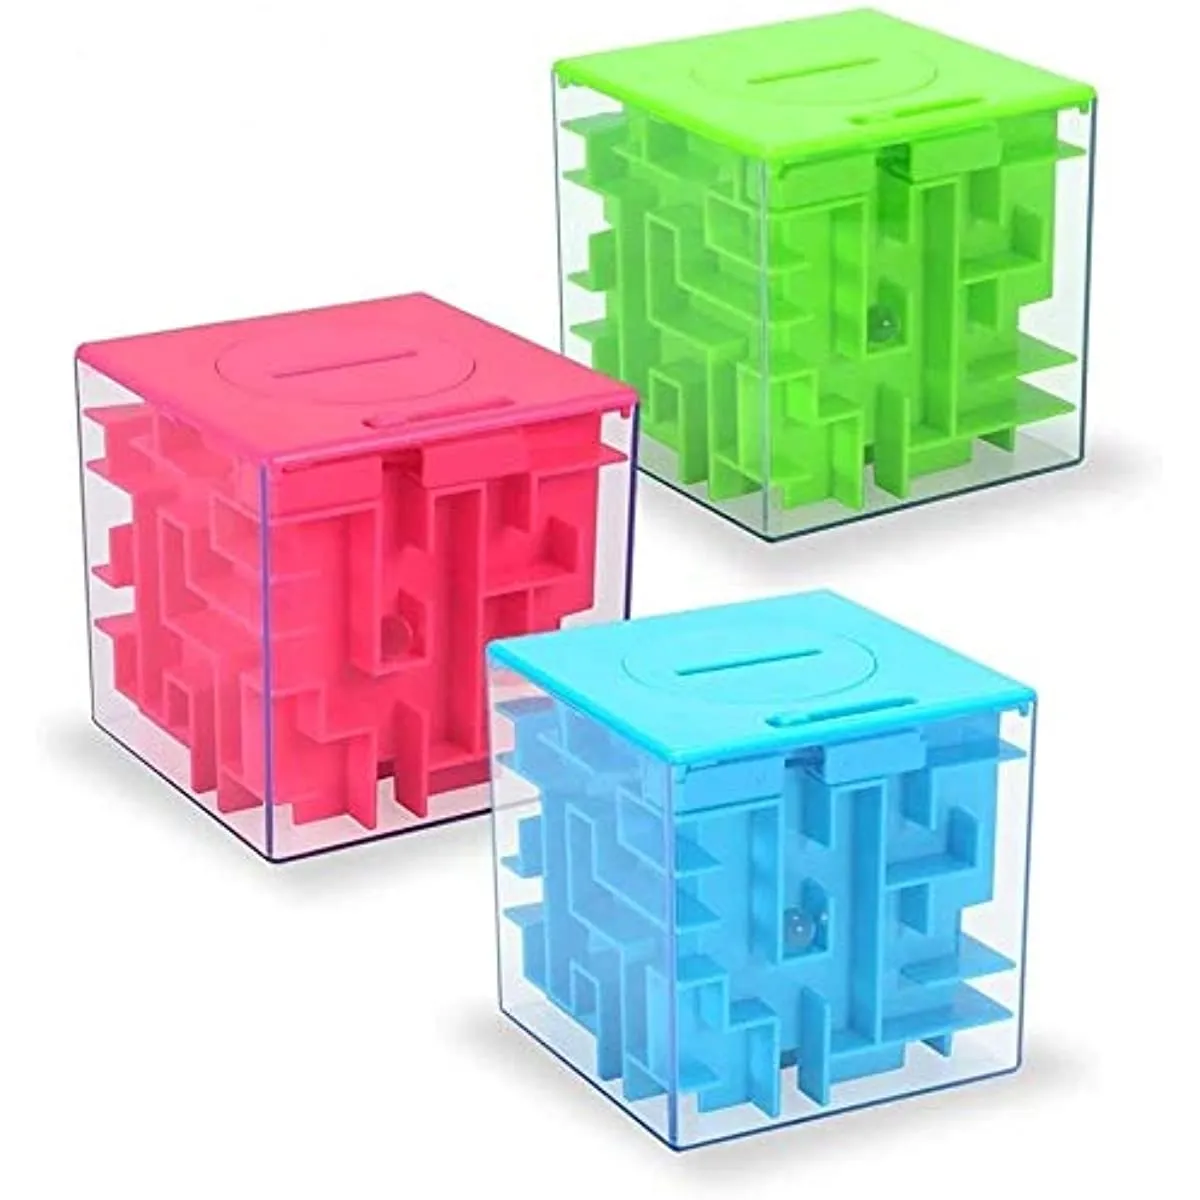 Science Toys 3Pcs Money Maze Puzzle Box Twister CK Unique Money Gift Holder Fun Games for Kids and Adult Birthday